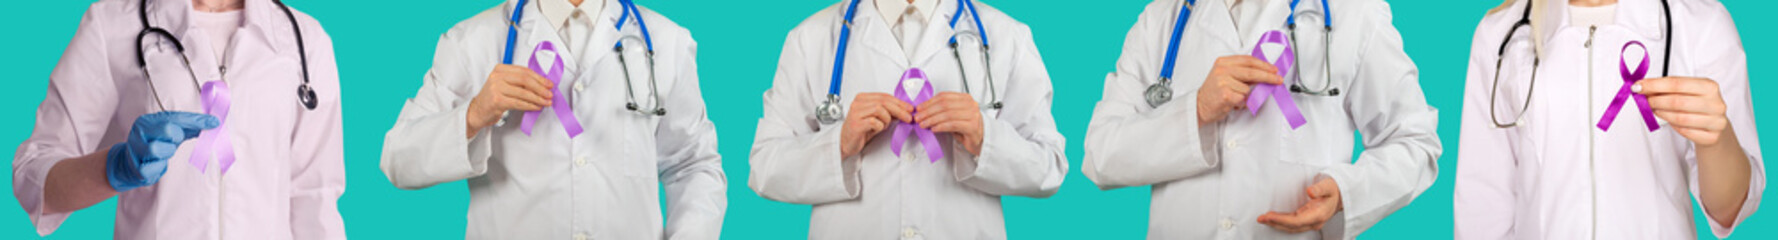 Set of five images doctor holding a purple ribbon in hands ADD,ADHD,Alzheimer Disease, Arnold...